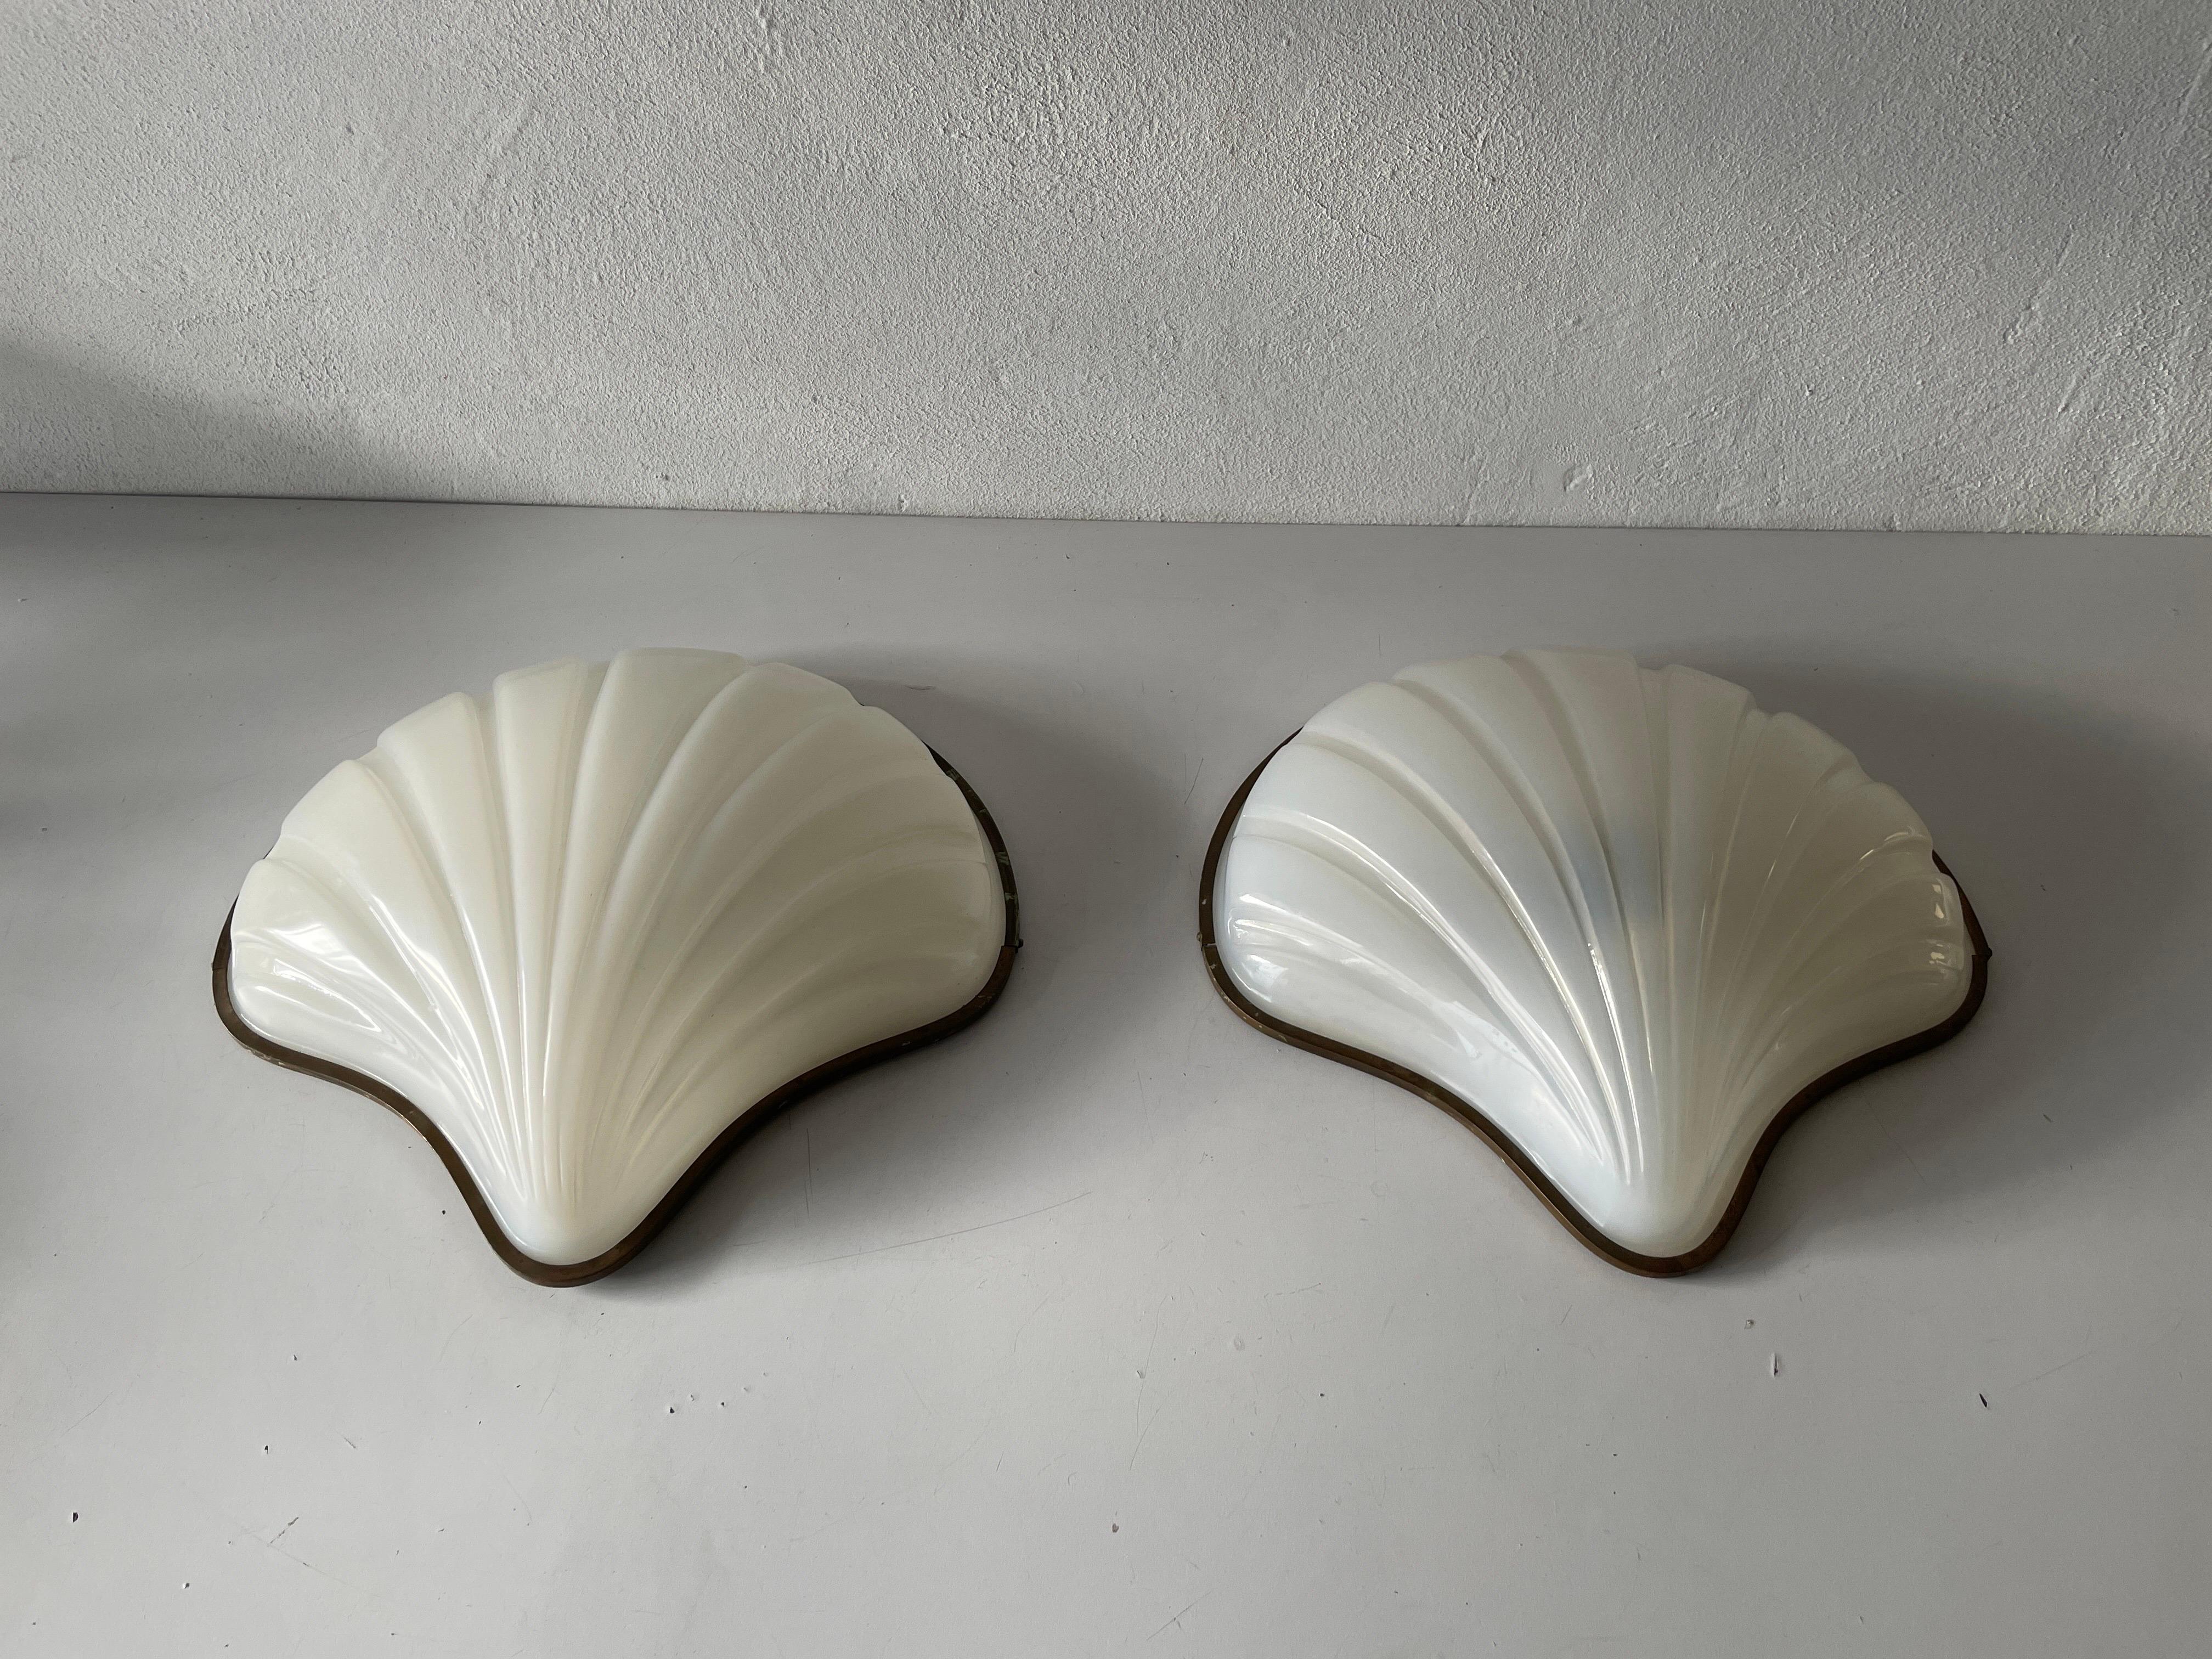 Unique white Plexiglass shell shaped pair of large sconces, 1950s, Italy
Very elegant and Minimalist wall lamps
Lamp is in very good condition.
These lamps works with E27 standard light bulbs.
Wired and suitable to use in all countries. (110-220